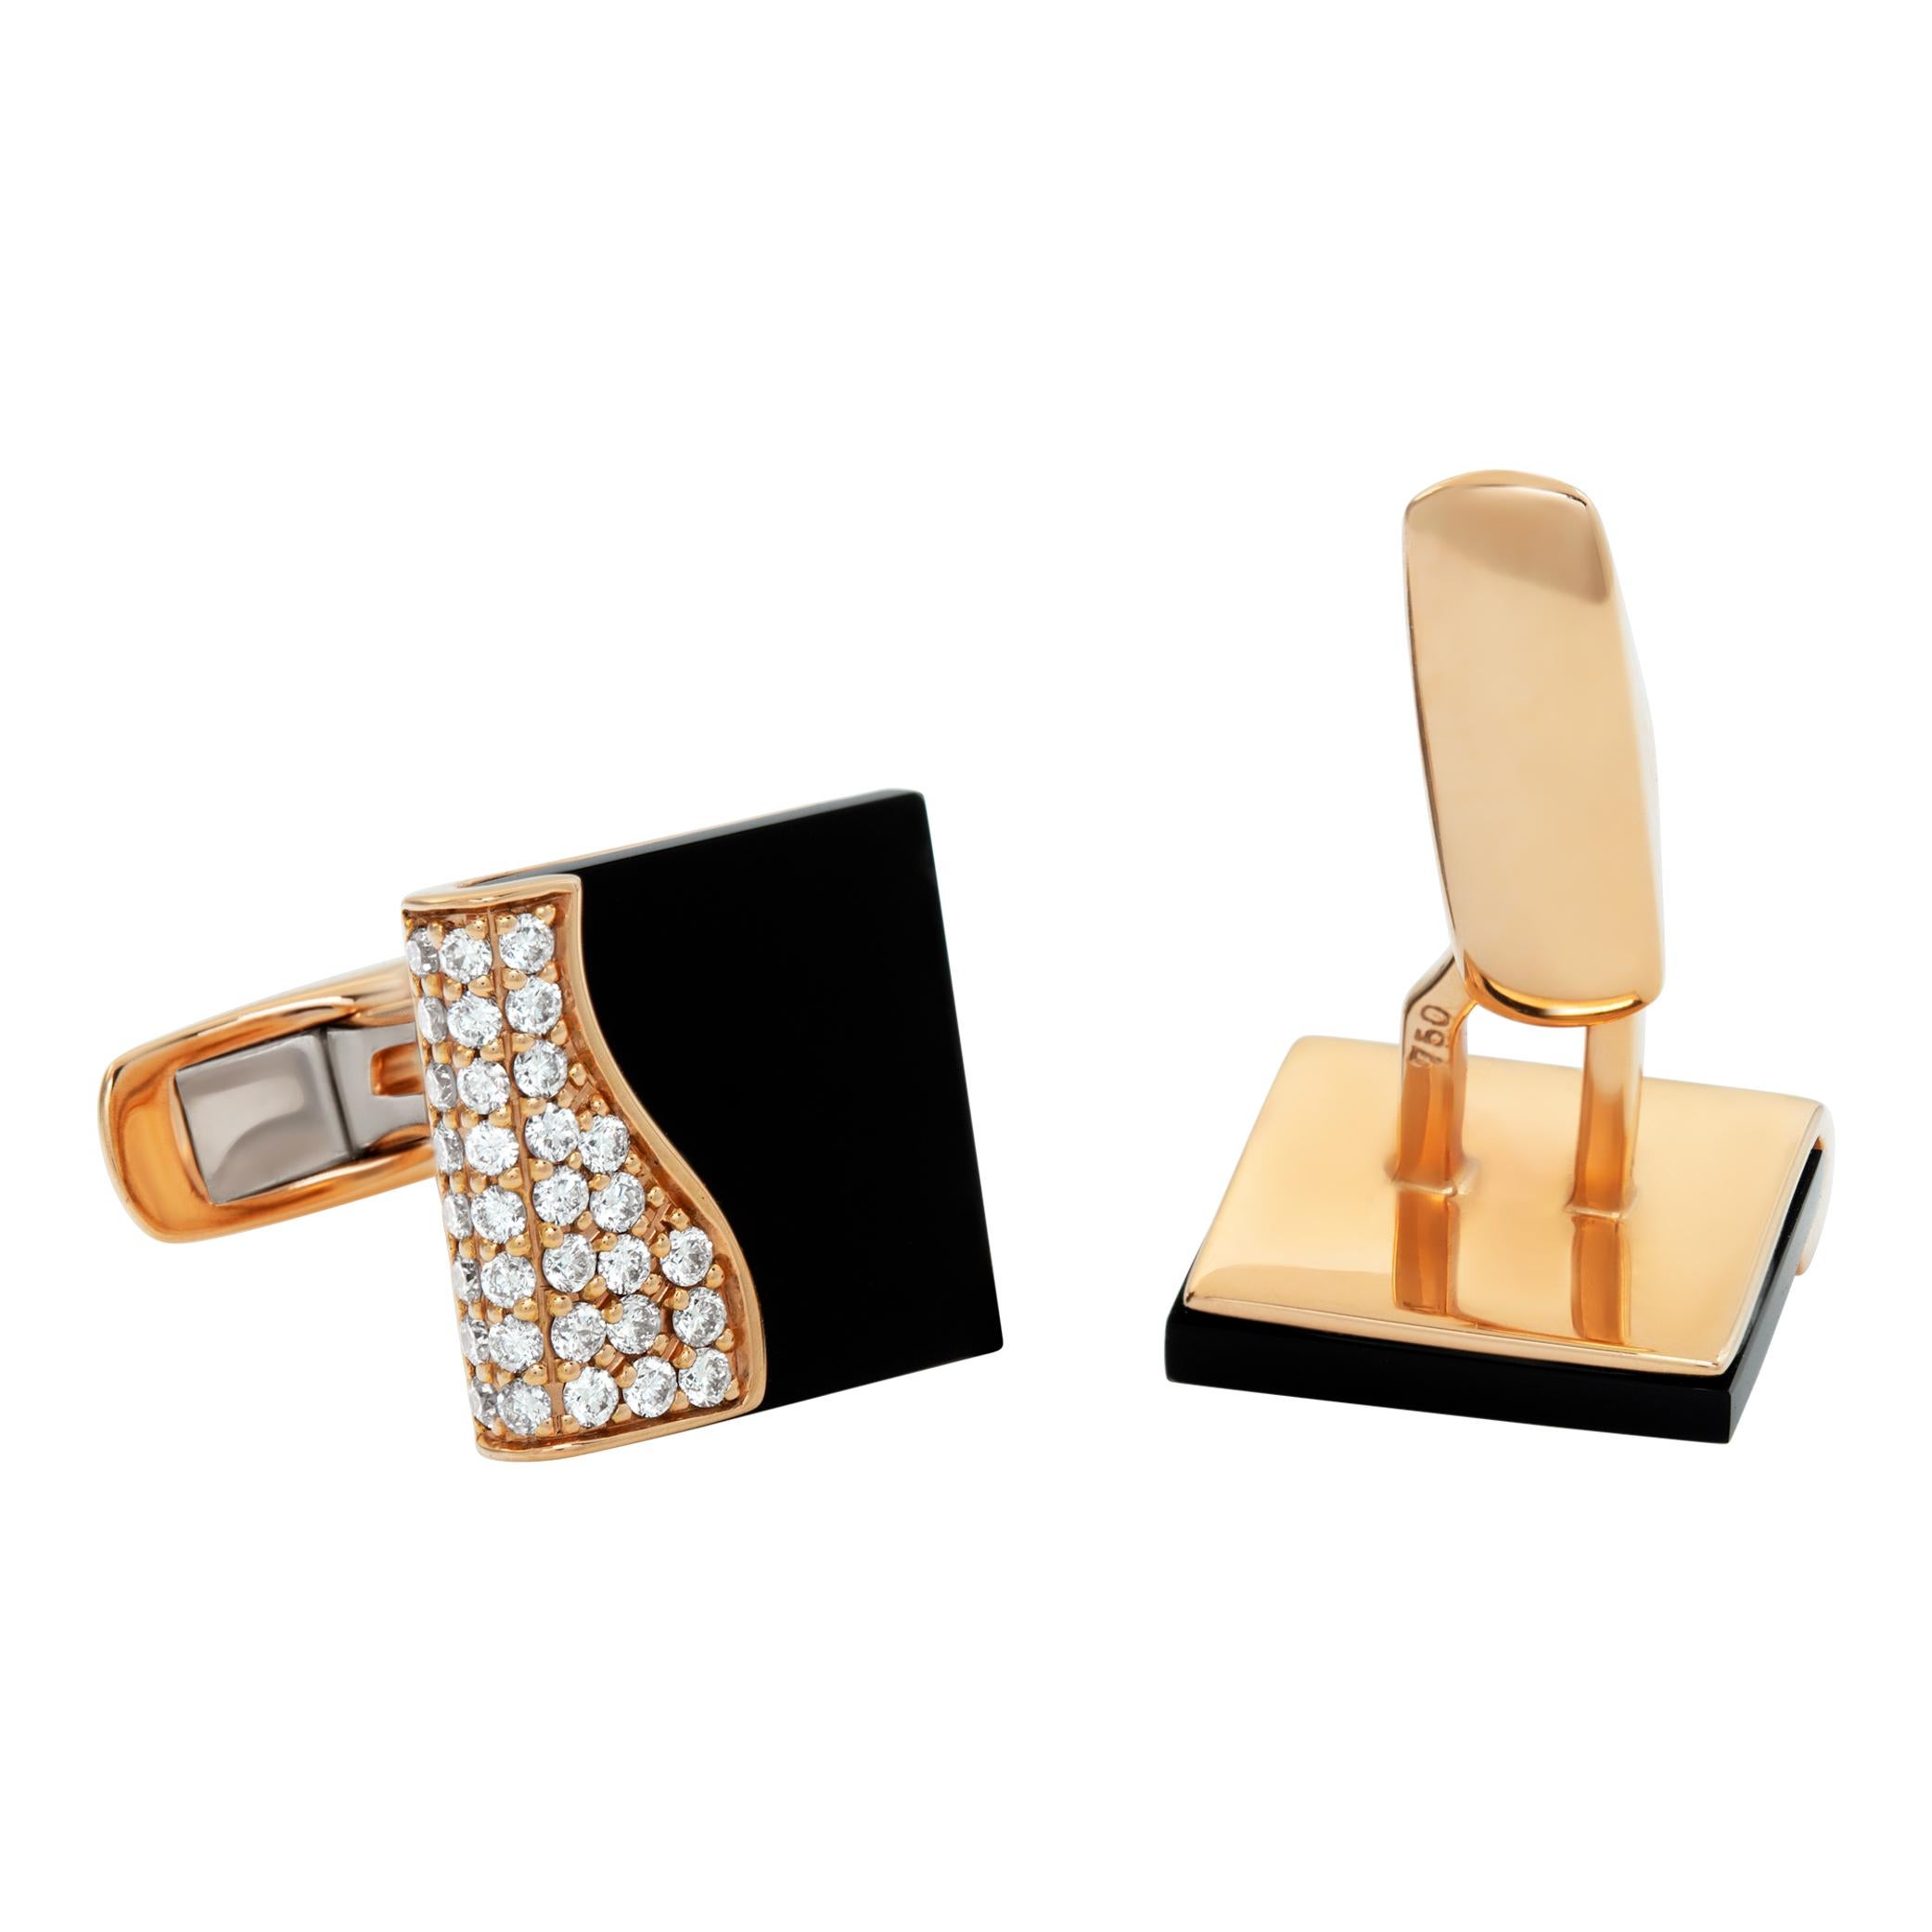 Onyx square cufflinks in 18k rose gold with 0.70 carat in round brilliant ccut pave diamonds (G-H Color, VS Clarity). Cufflinks measure 14mm x 14mm.
